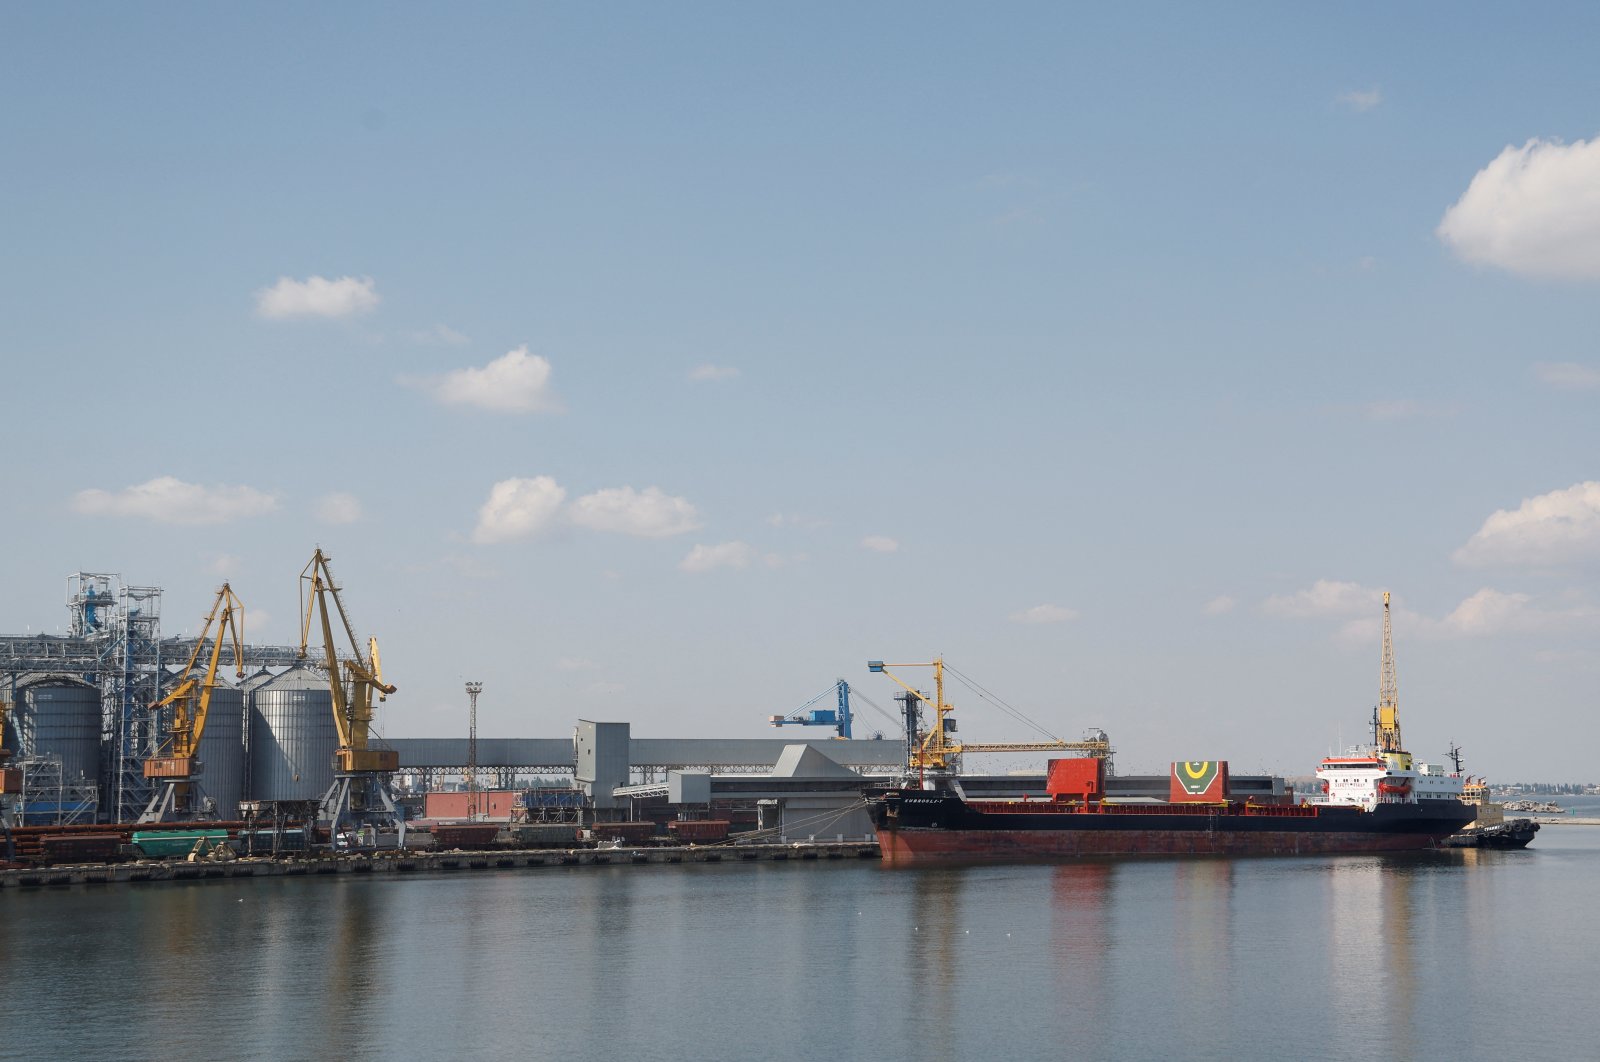 A view of the Comorian-flagged general cargo ship "Kubrosli Y." in the seaport in Odessa after restarting grain exports, Ukraine, Aug. 19, 2022. (Reuters Photo)